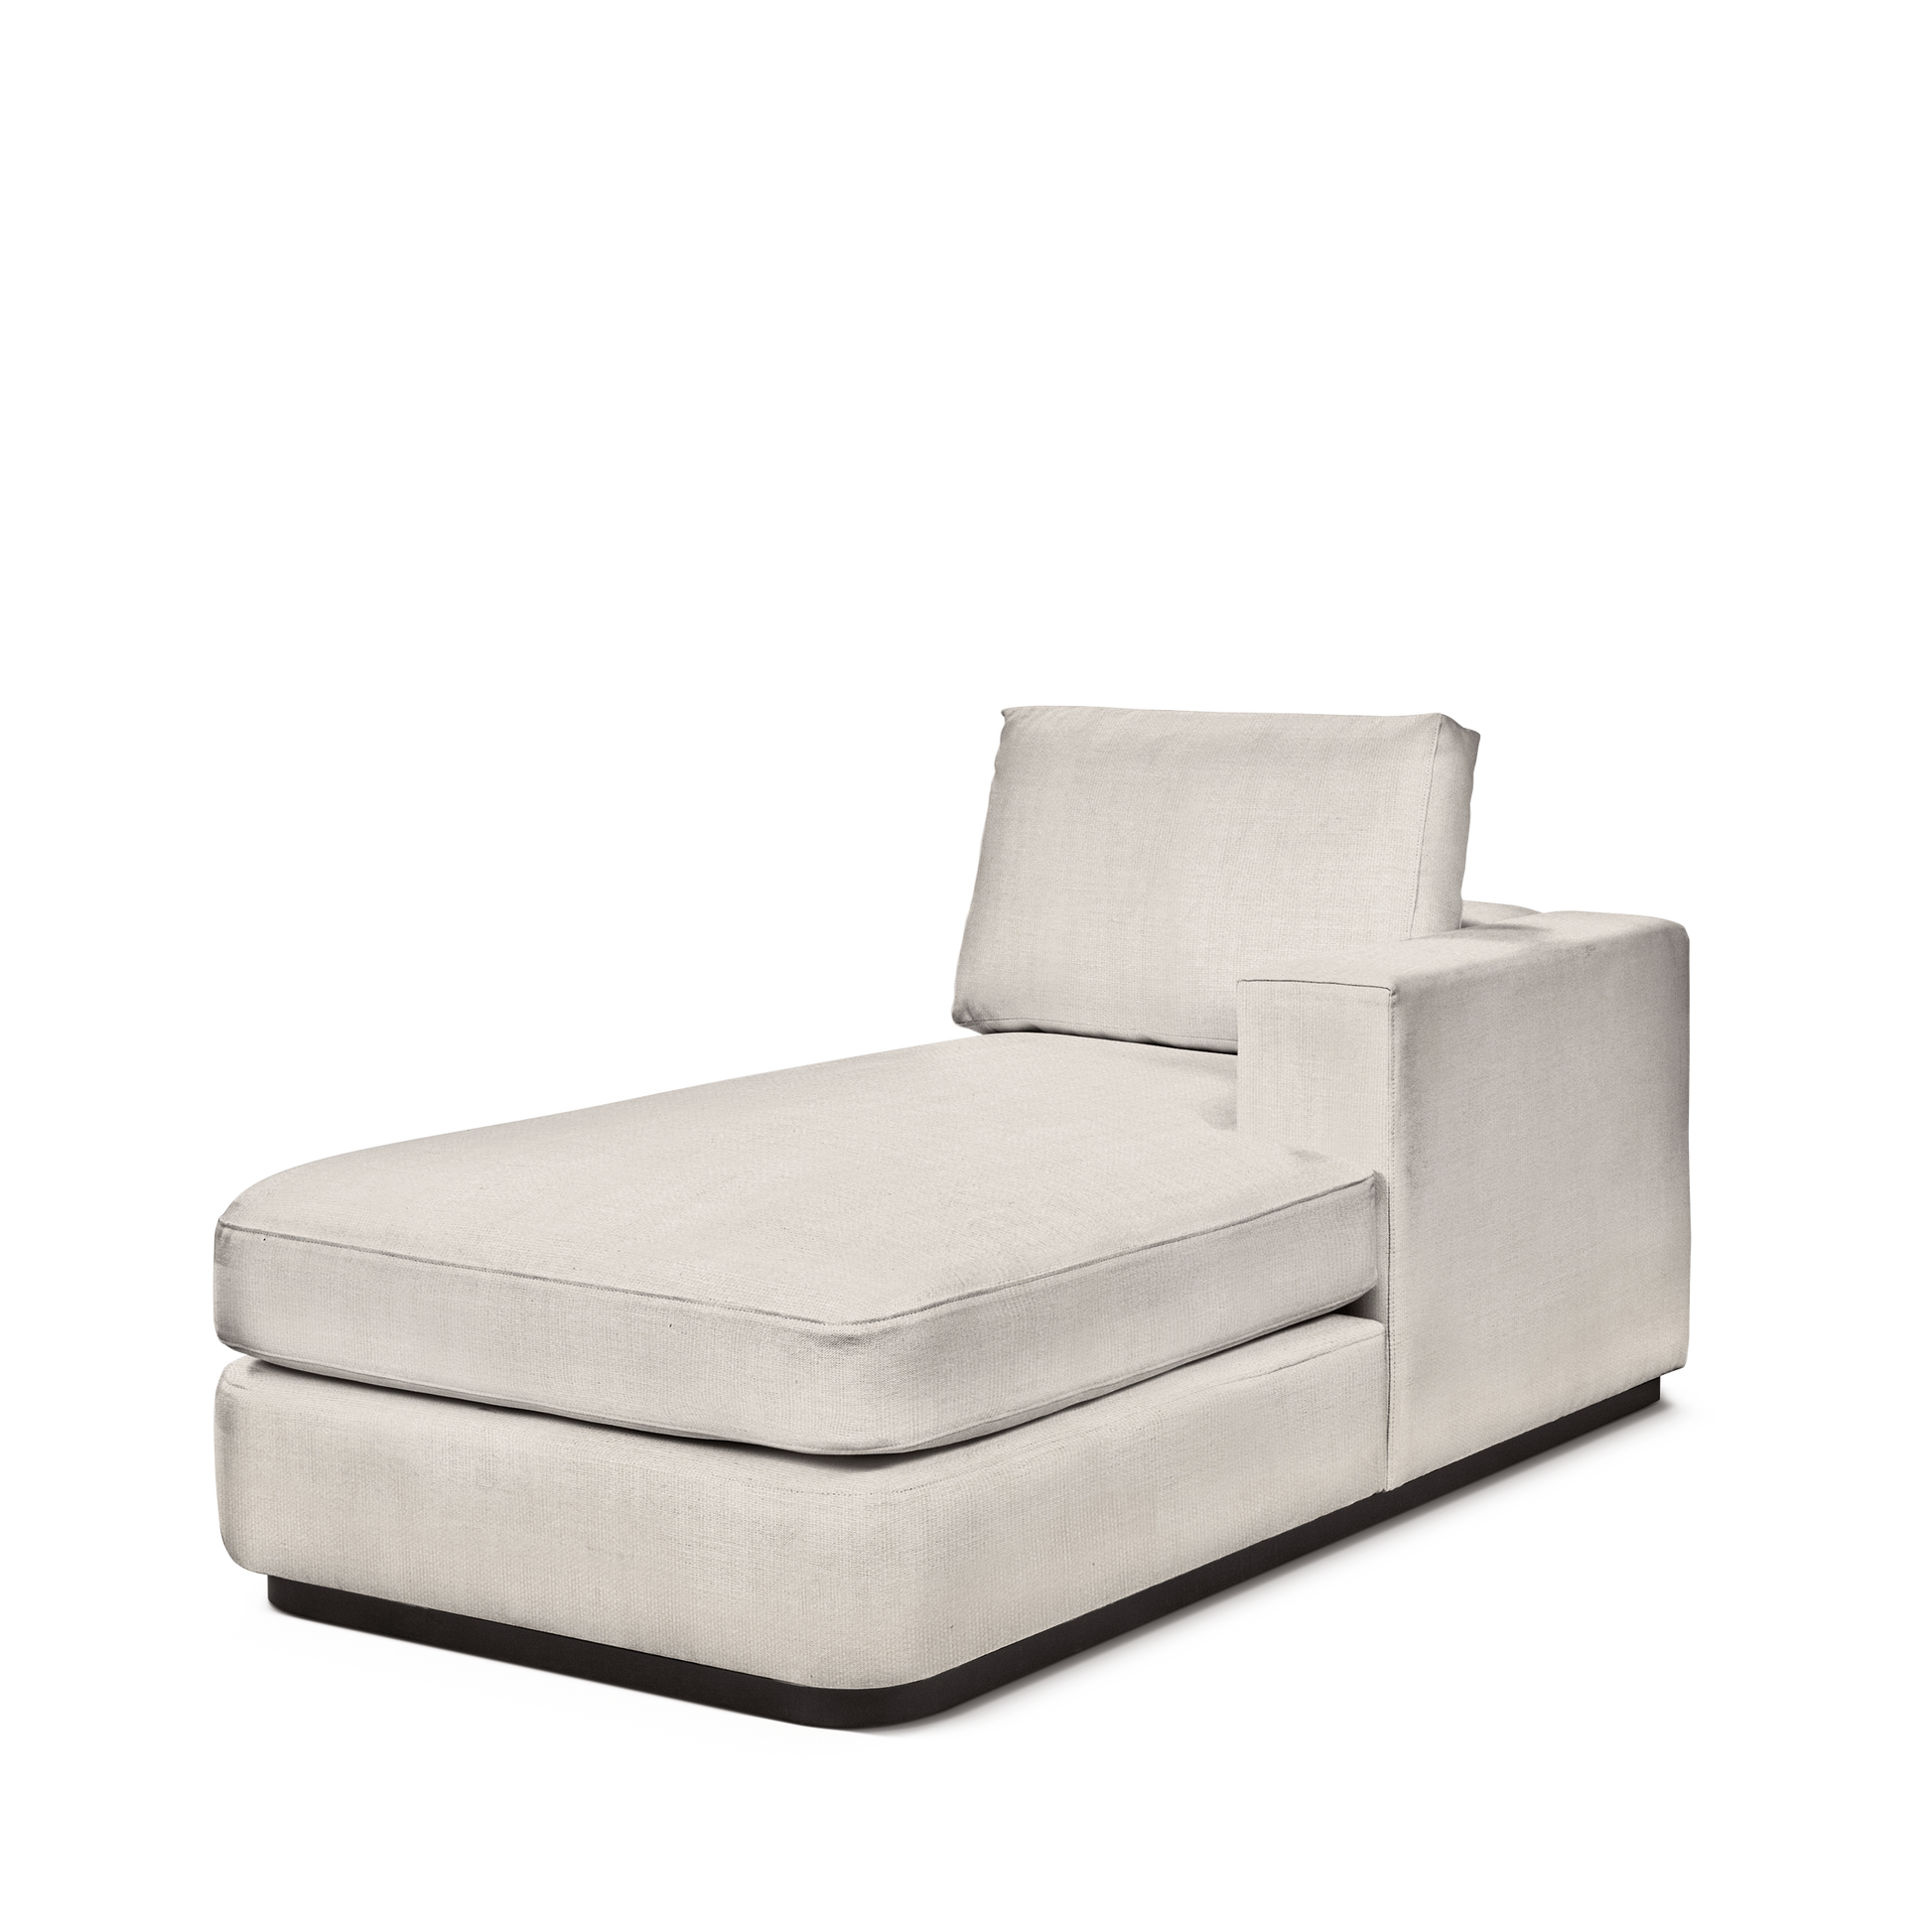 ATLAS 90 Lounge Bed arm rest right with light grey textile 